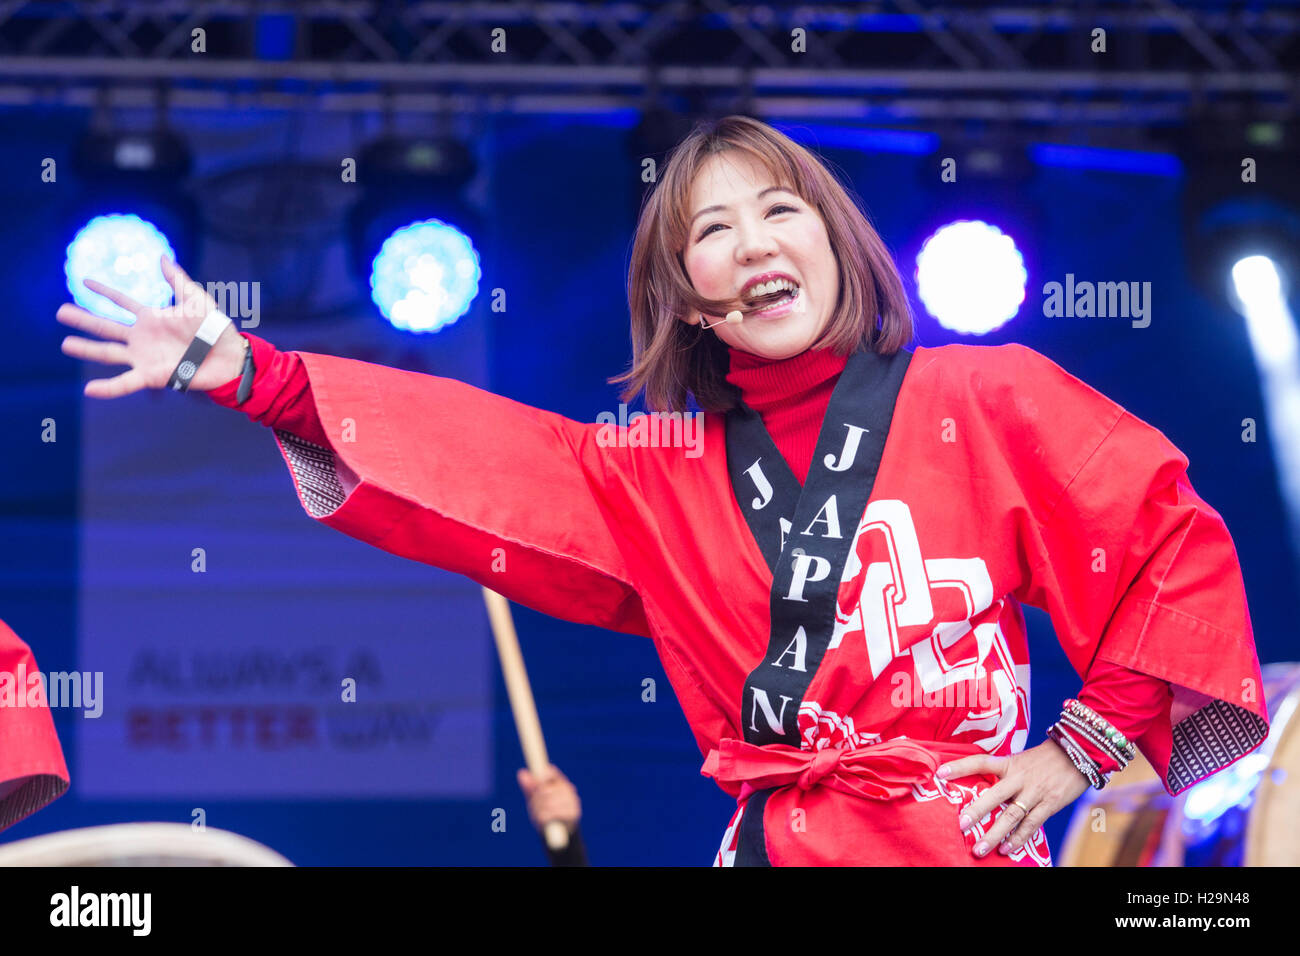 London, UK. 25 September 2016. Naomi Suzuki performing. London celebrates Japan Matsuri 2016. The festival, now in its 8th year, brings people together to enjoy a day of Japanese food, music, dance and culture in Trafalgar Square. Credit:  Bettina Strenske/Alamy Live News Stock Photo